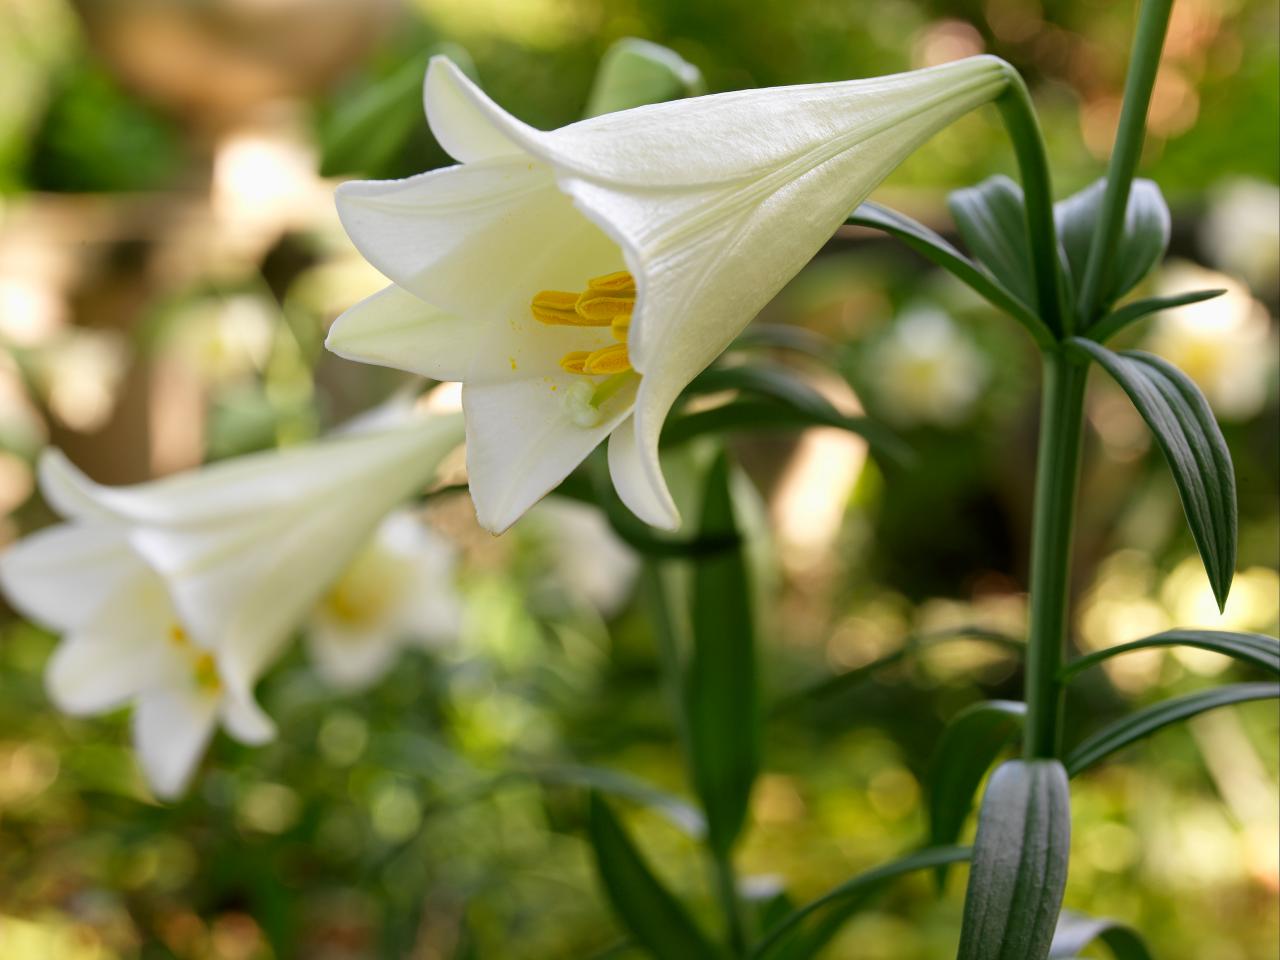 How To Grow And Care For Easter Lilies Hgtv,Types Of Hamsters